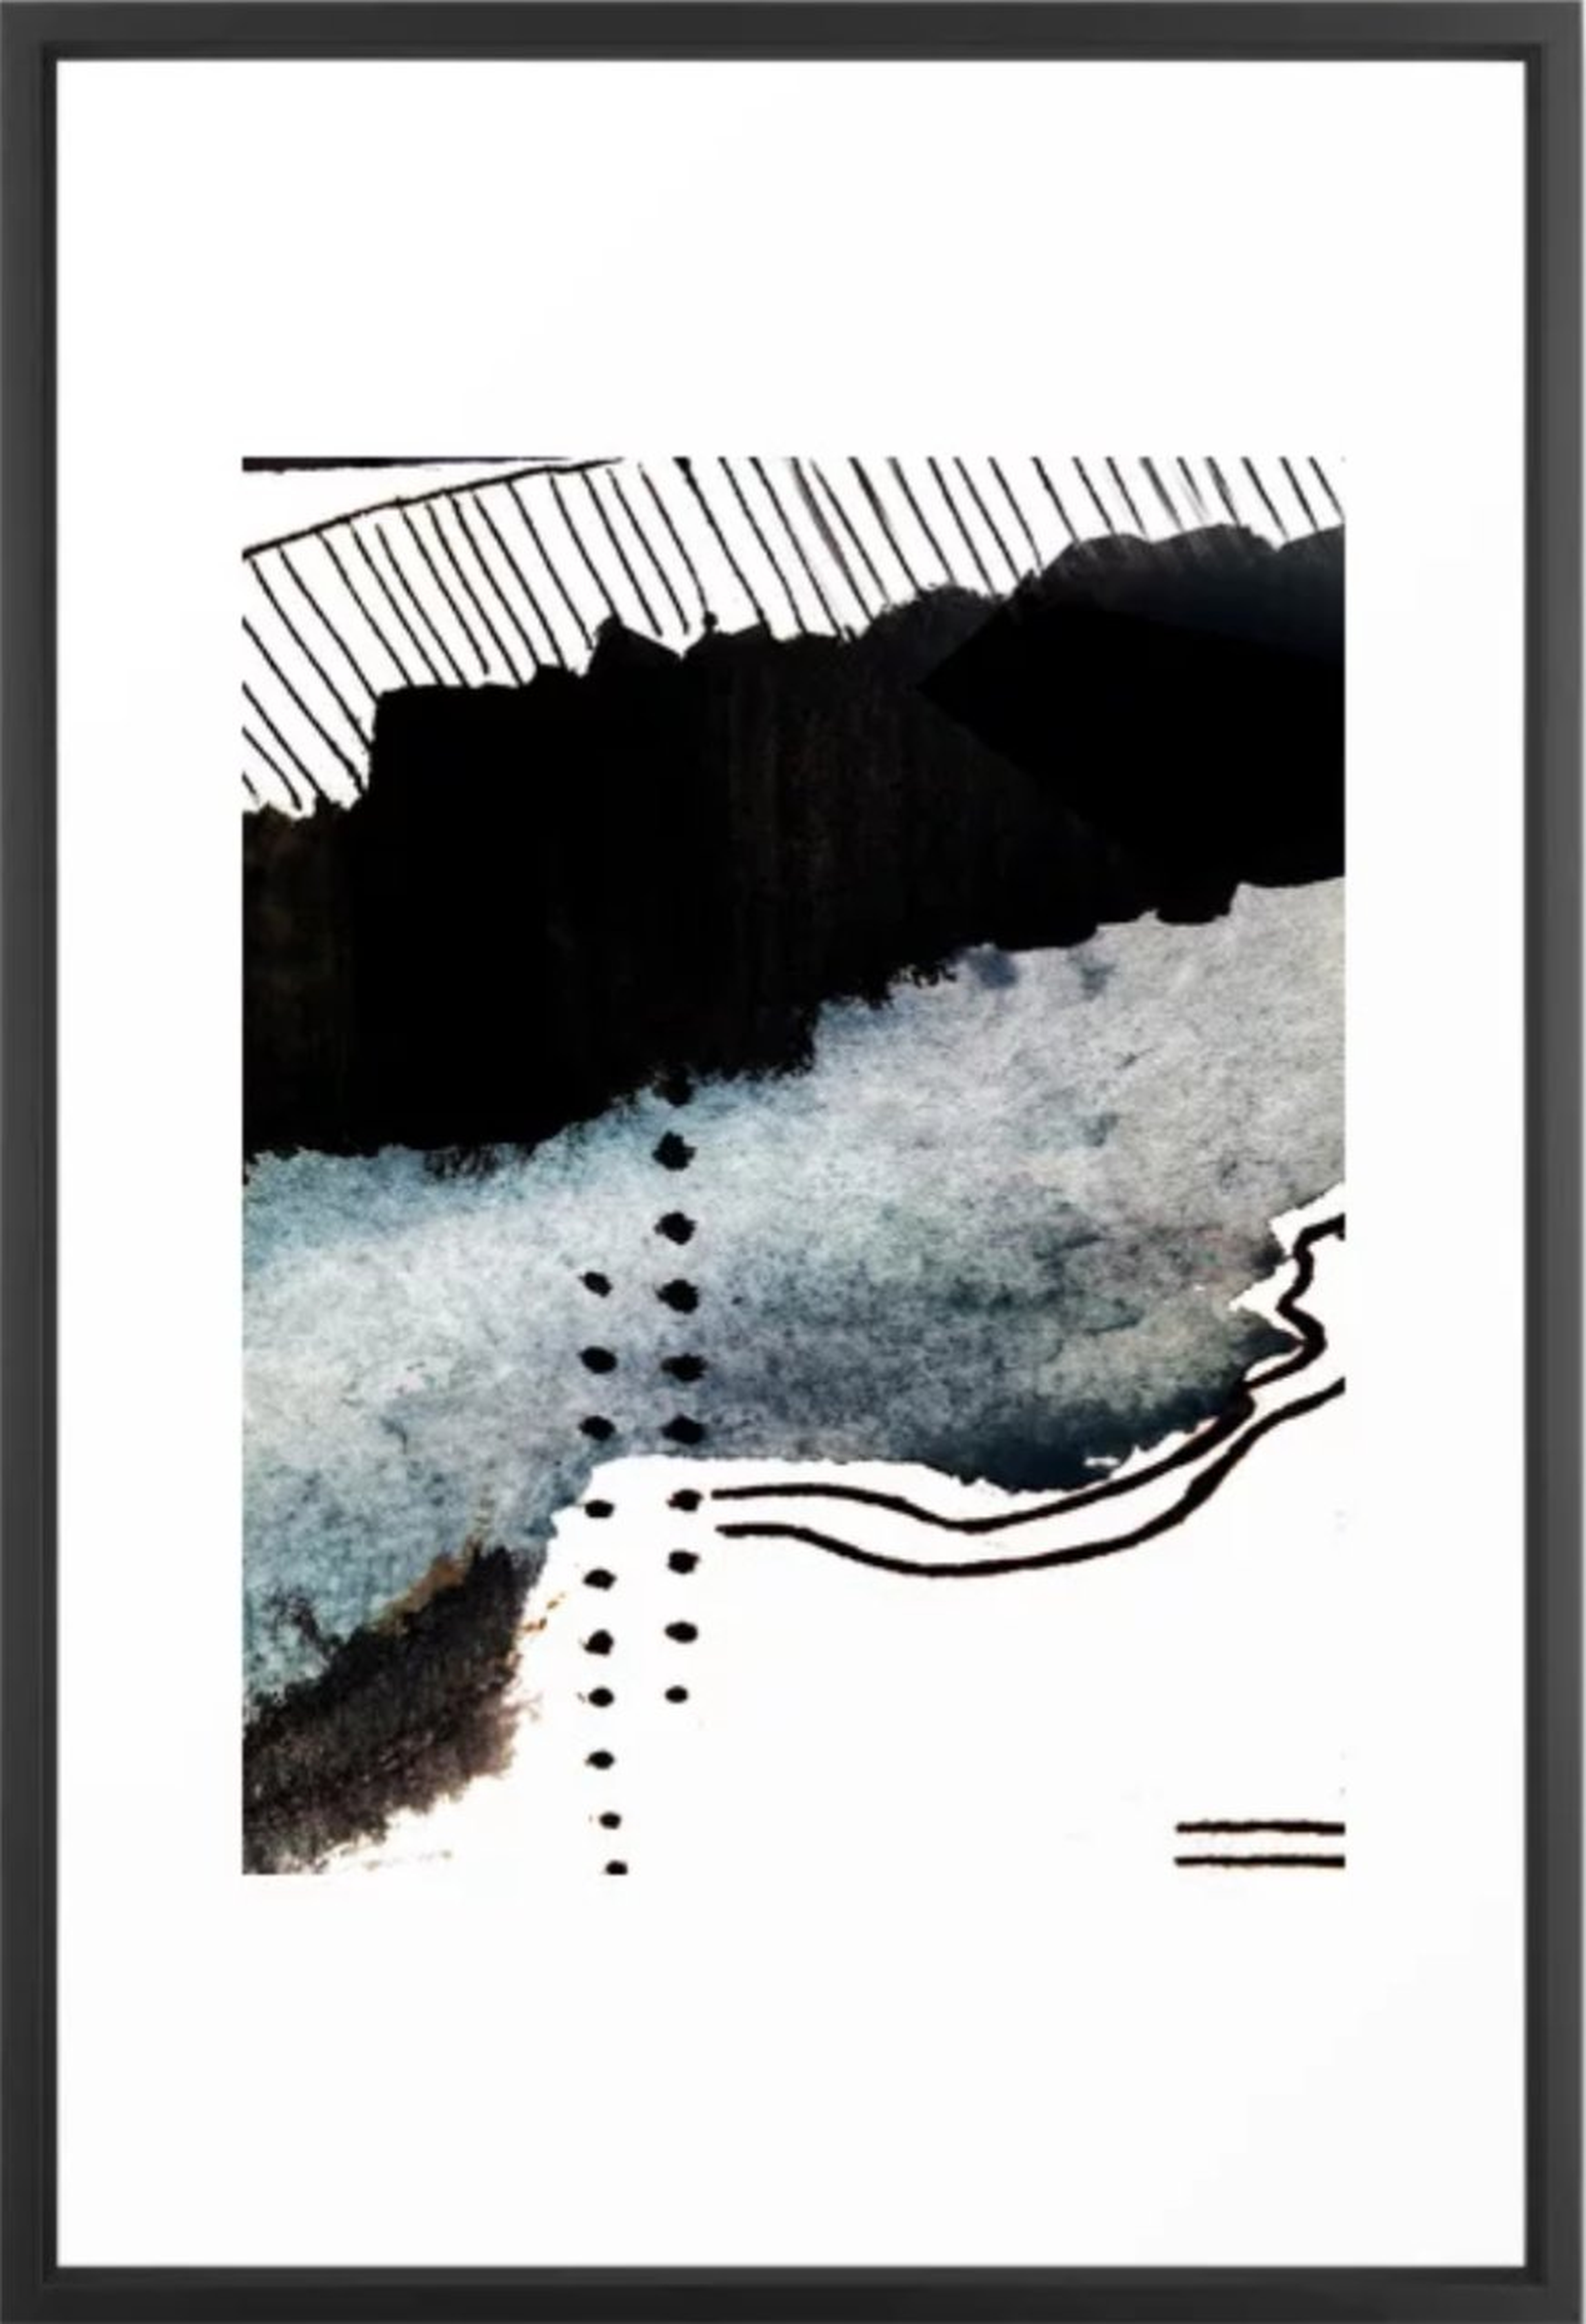 Closer - a black, blue, and white abstract piece Framed Art Print 26" x 28" - Society6